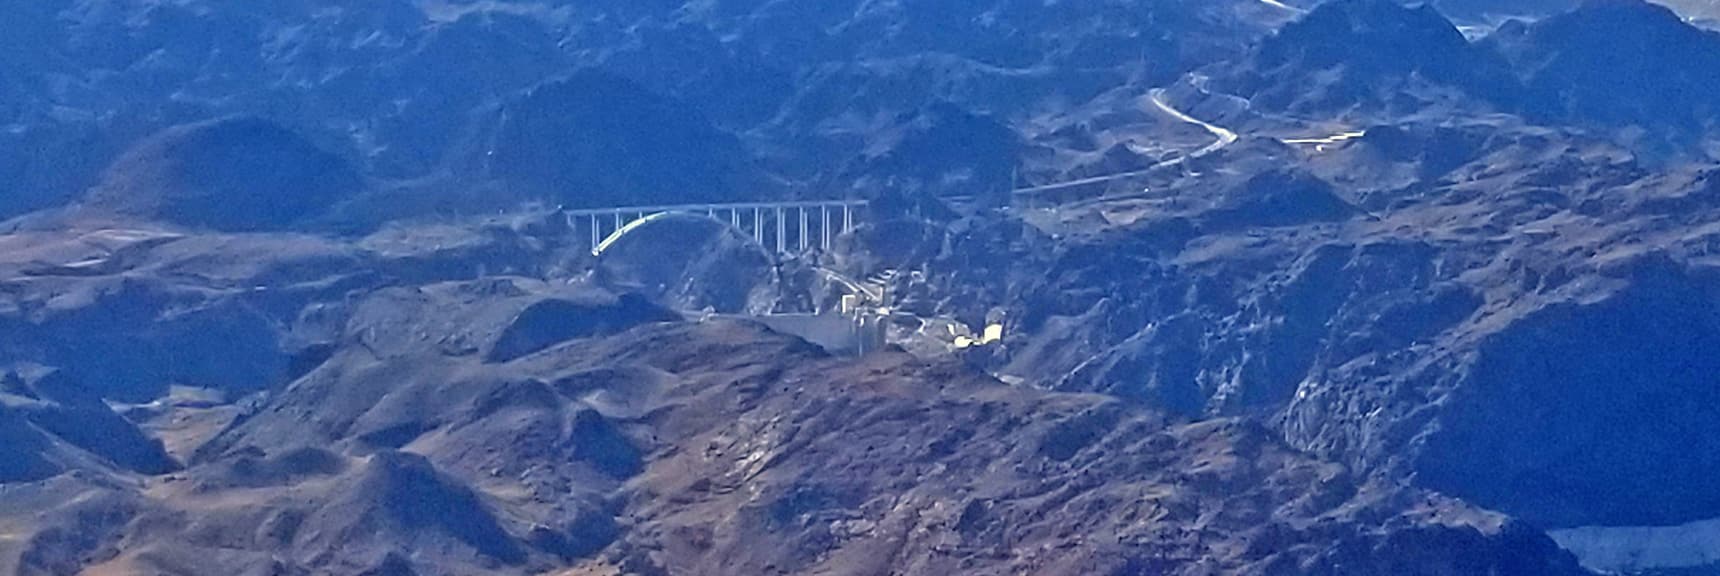 Hoover Dam and I-11 Bridge from Fortification Hill Summit | Fortification Hill | Lake Mead National Recreation Area, Arizona